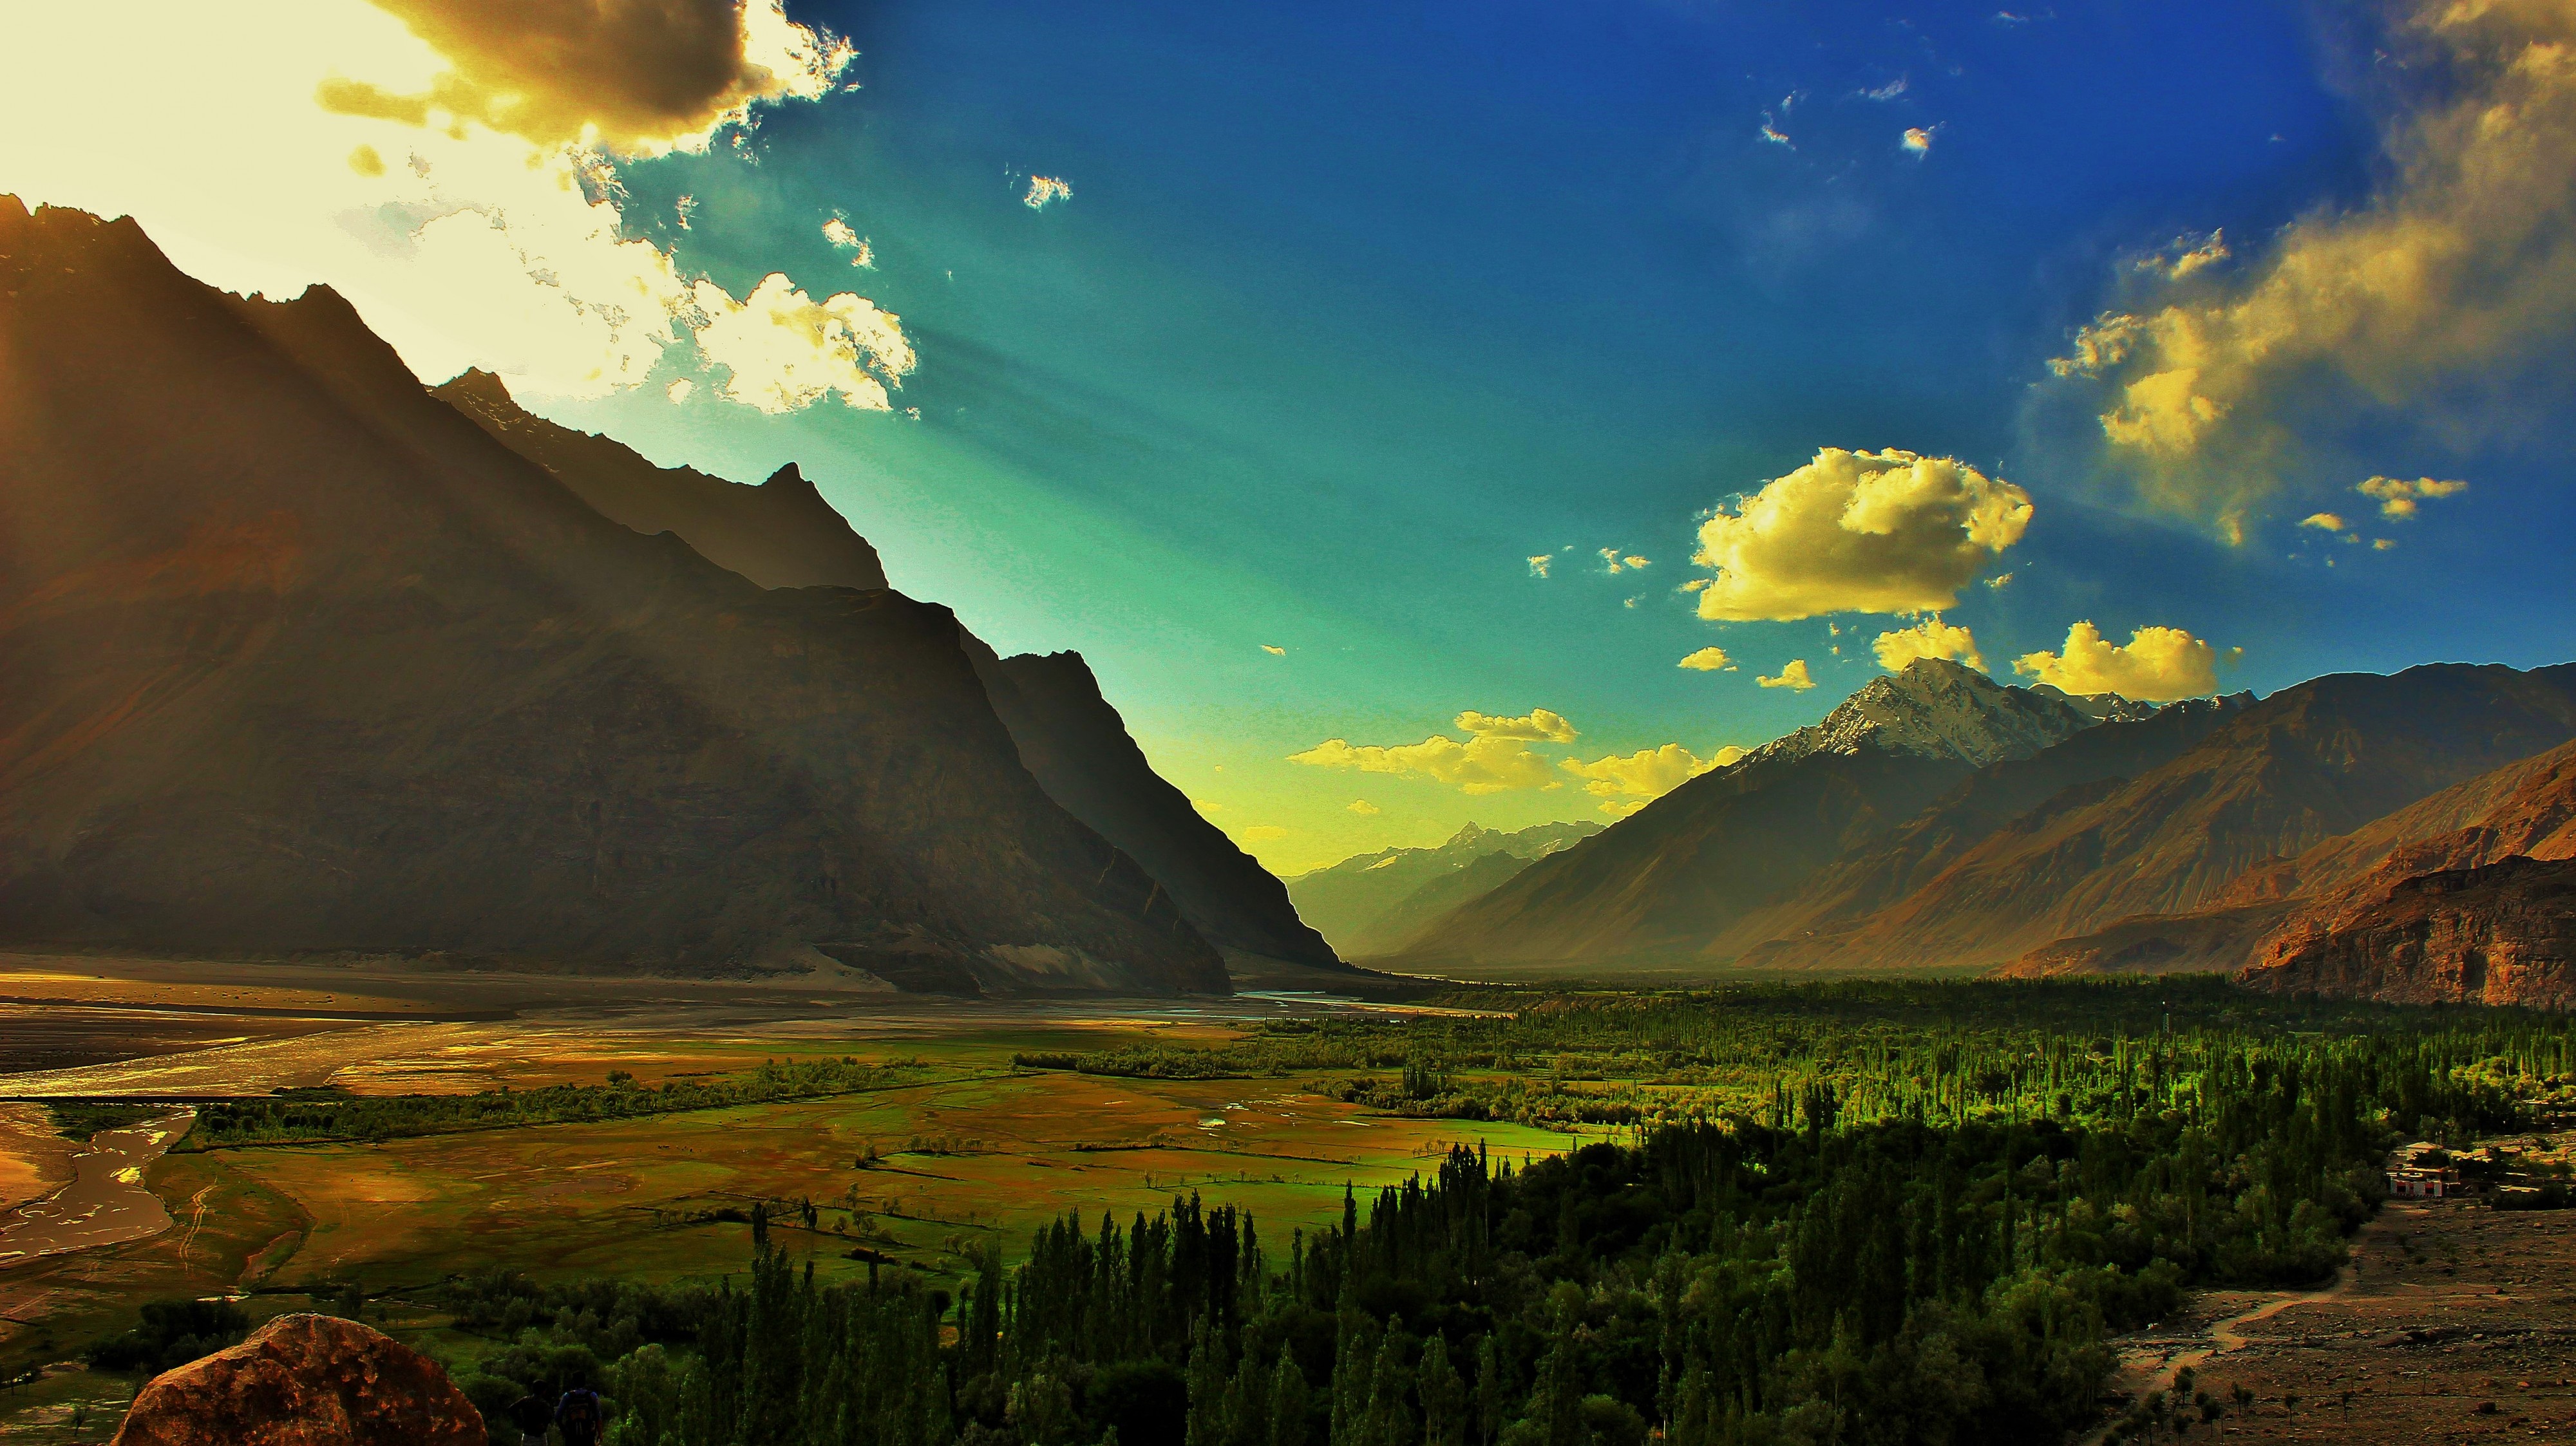 Shigar Valley - An Unknown Mystery of Nature